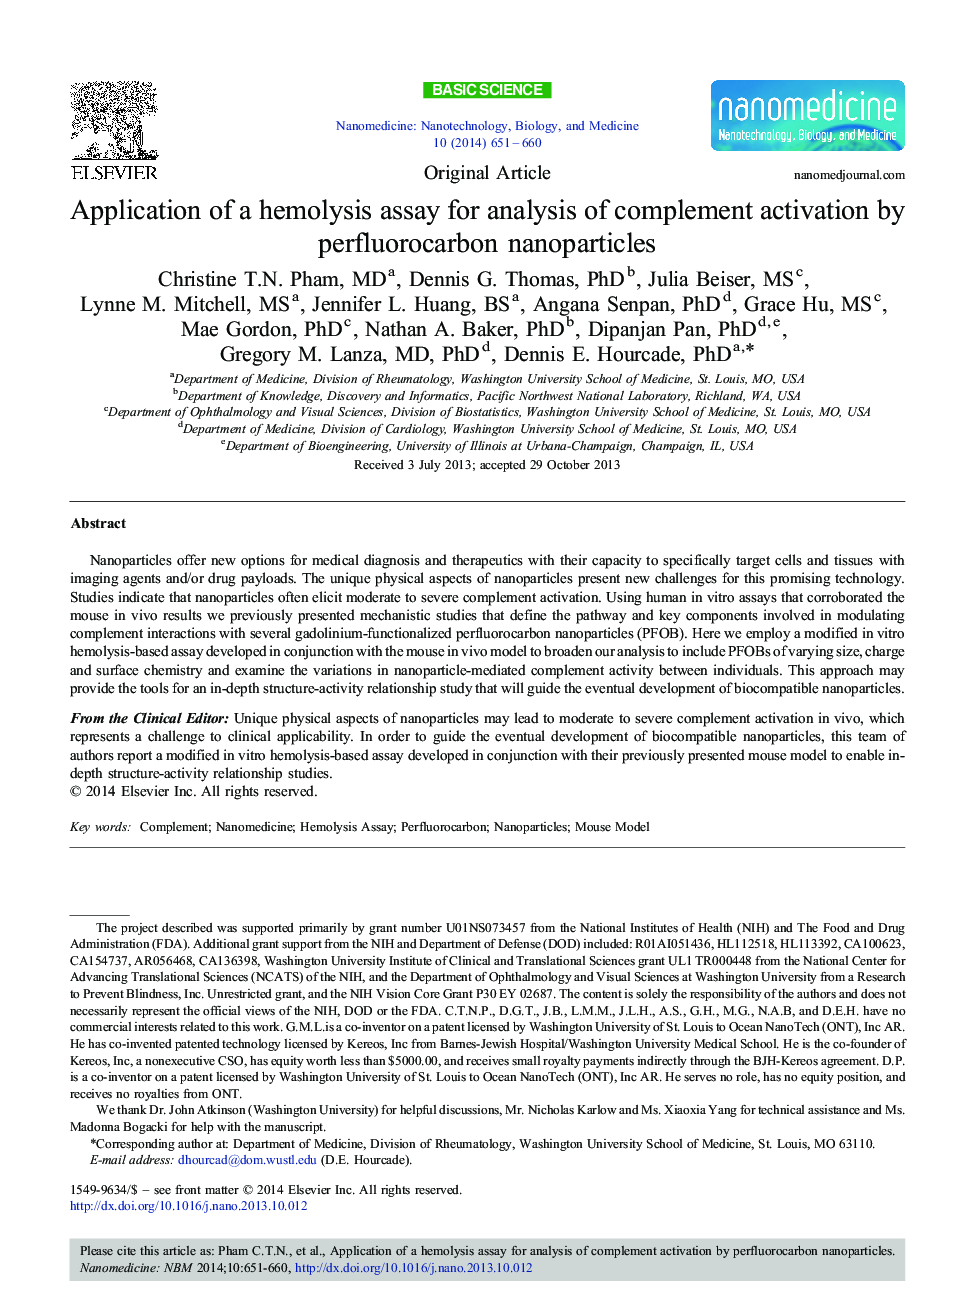 Application of a hemolysis assay for analysis of complement activation by perfluorocarbon nanoparticles 